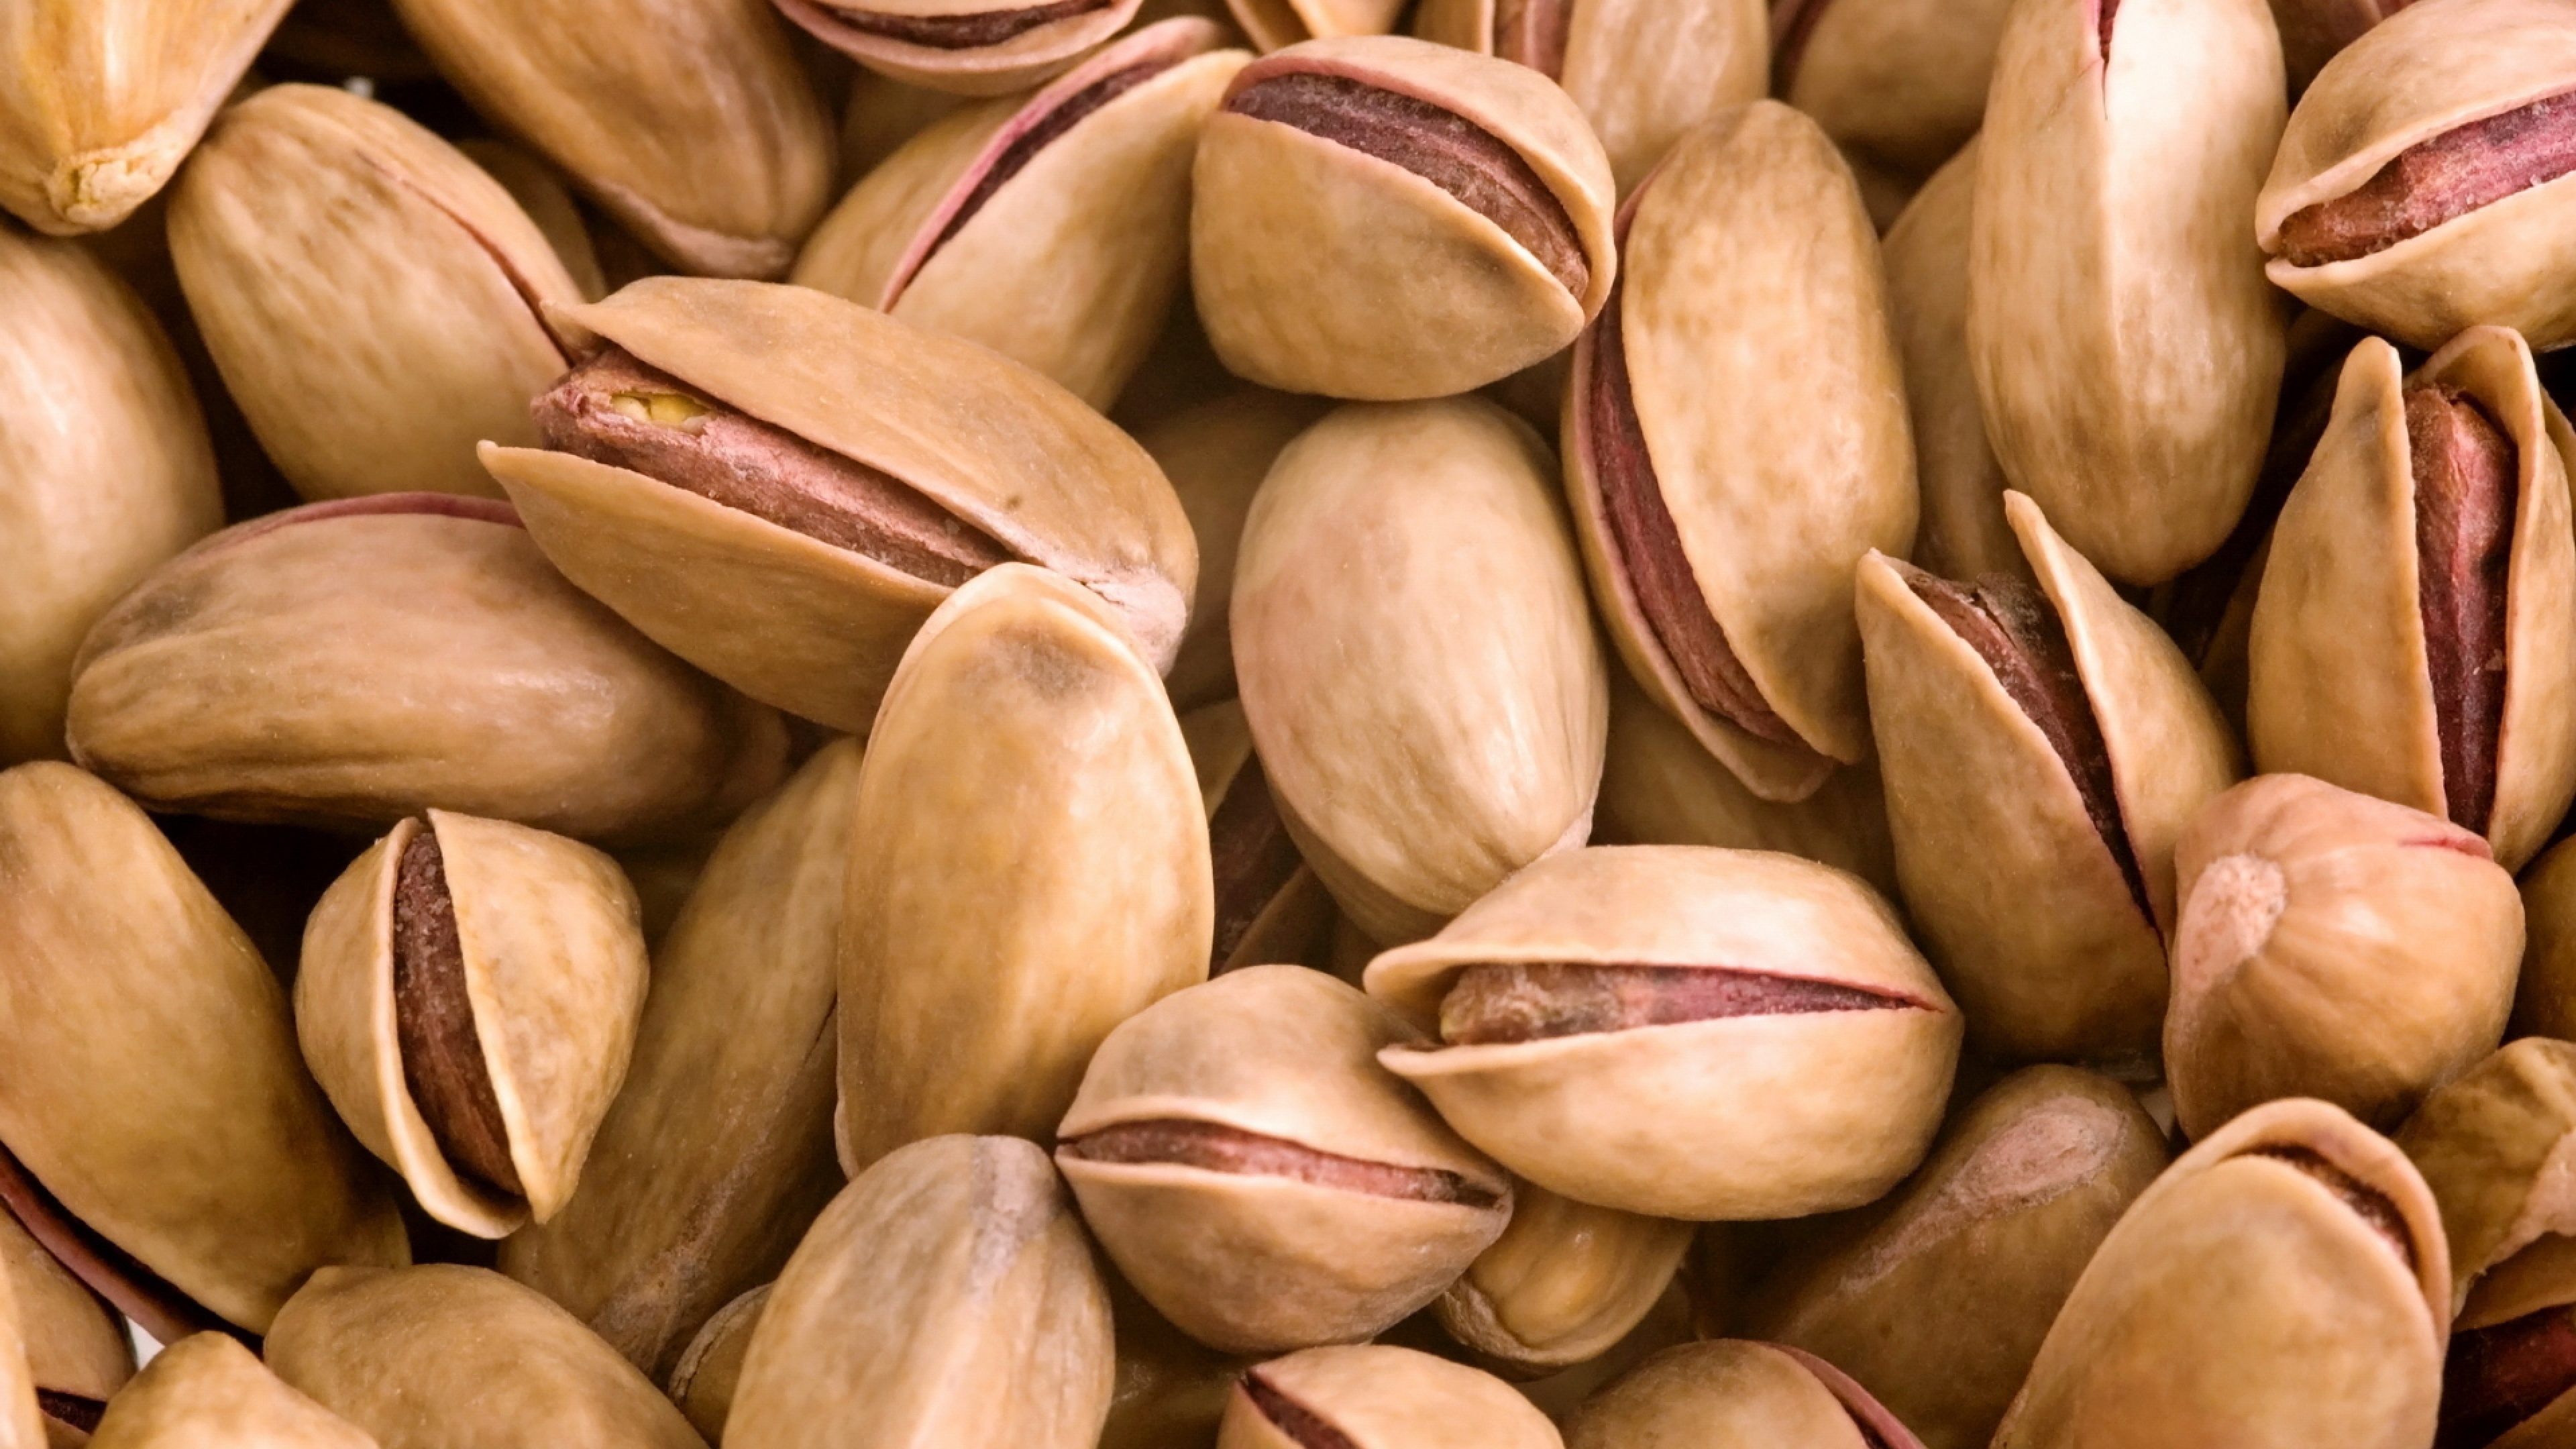 Nuts: Pistachio, A drupe, containing an elongated seed, which is the edible portion. 3840x2160 4K Background.